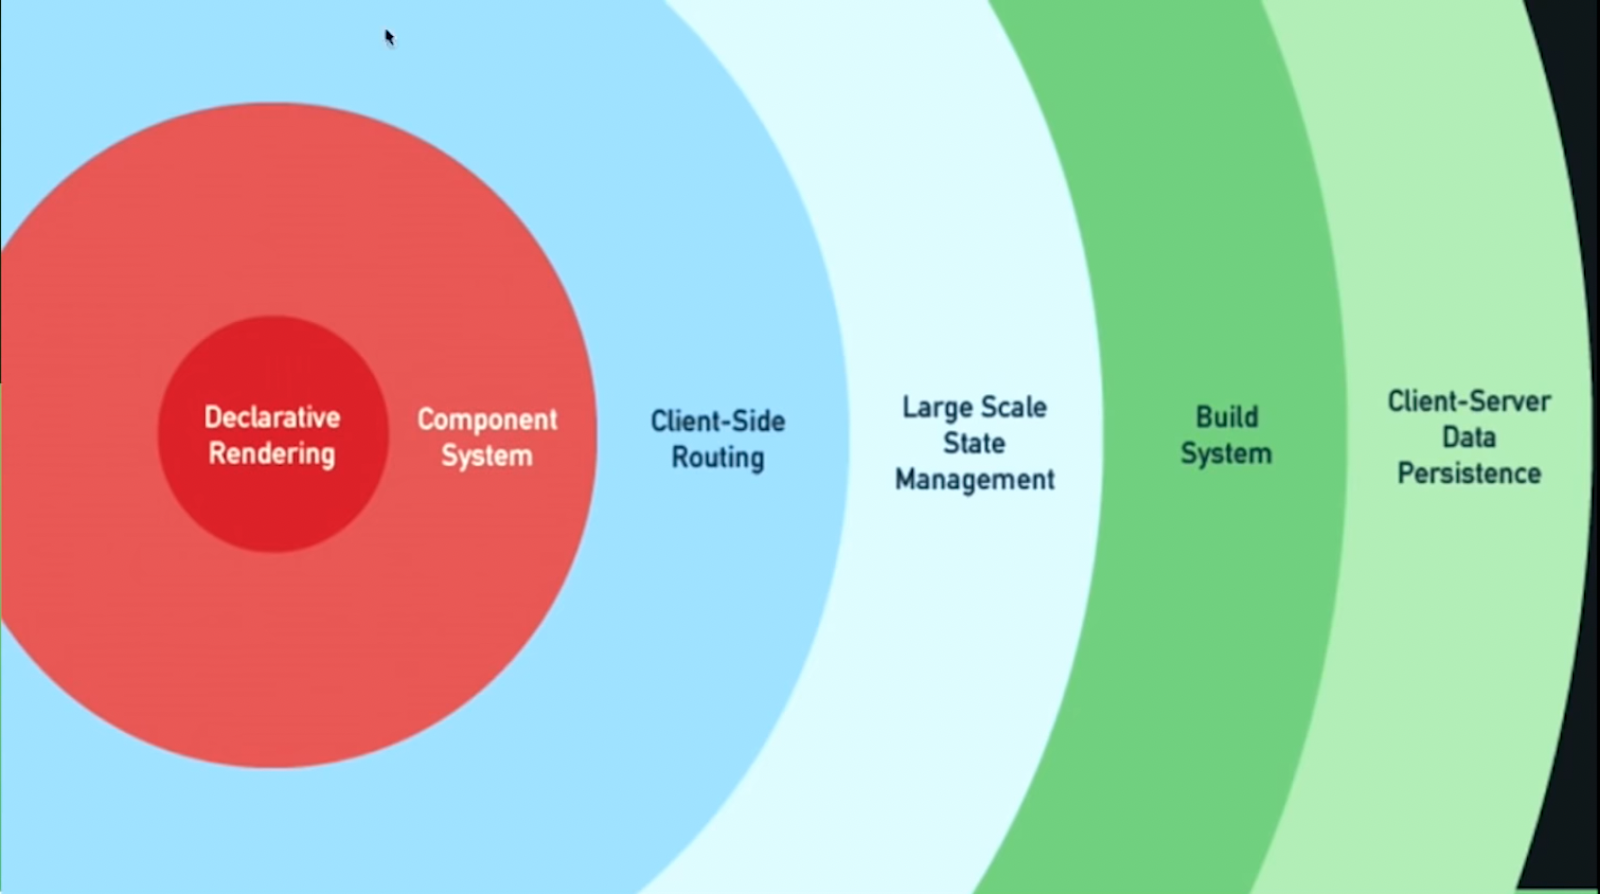 The layers of vue progressive learning. Declarative rendering, component system, client-side routing, large scale state management, build system, client/server data persistance